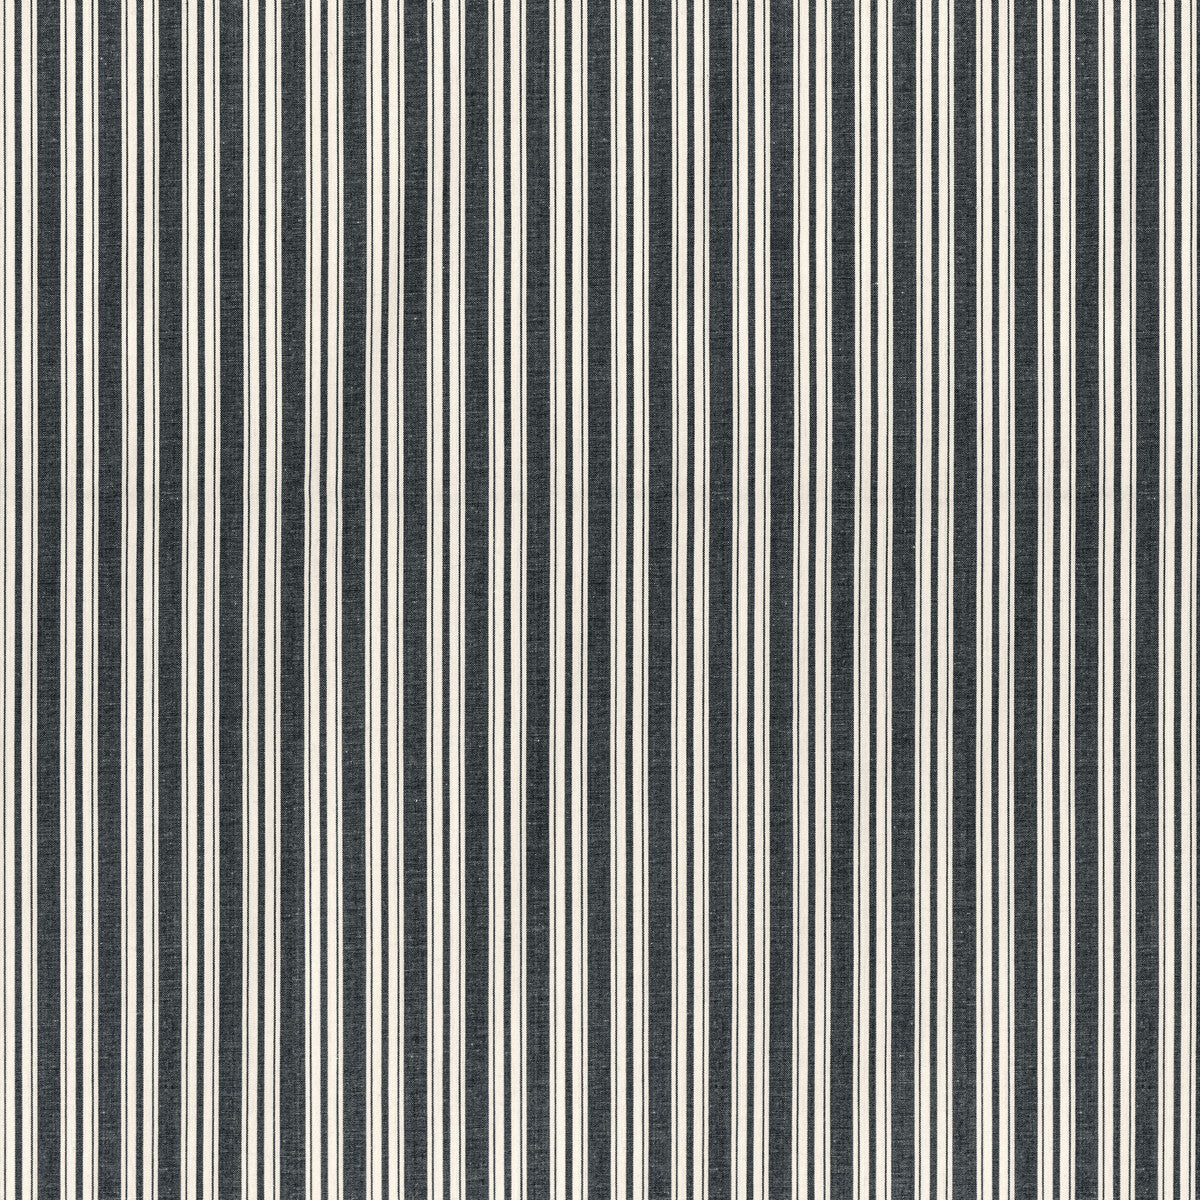 Selune Stripe fabric in noir color - pattern 8022118.8.0 - by Brunschwig &amp; Fils in the Normant Checks And Stripes II collection